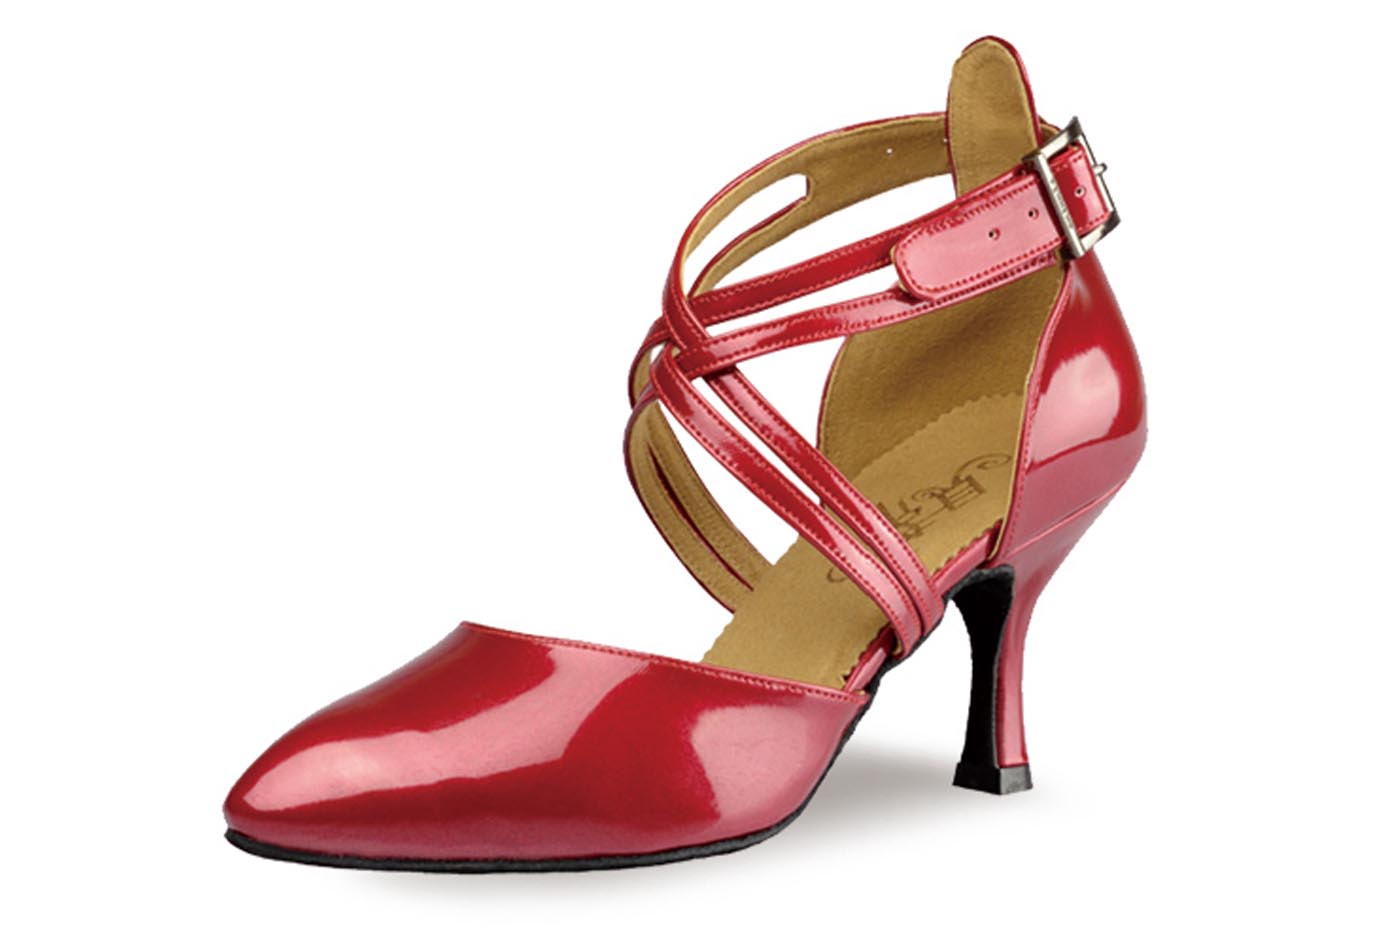 BD Dance 110 Red Patent Leather Ladies Tango Ballroom Shoe with Double Crossing Straps